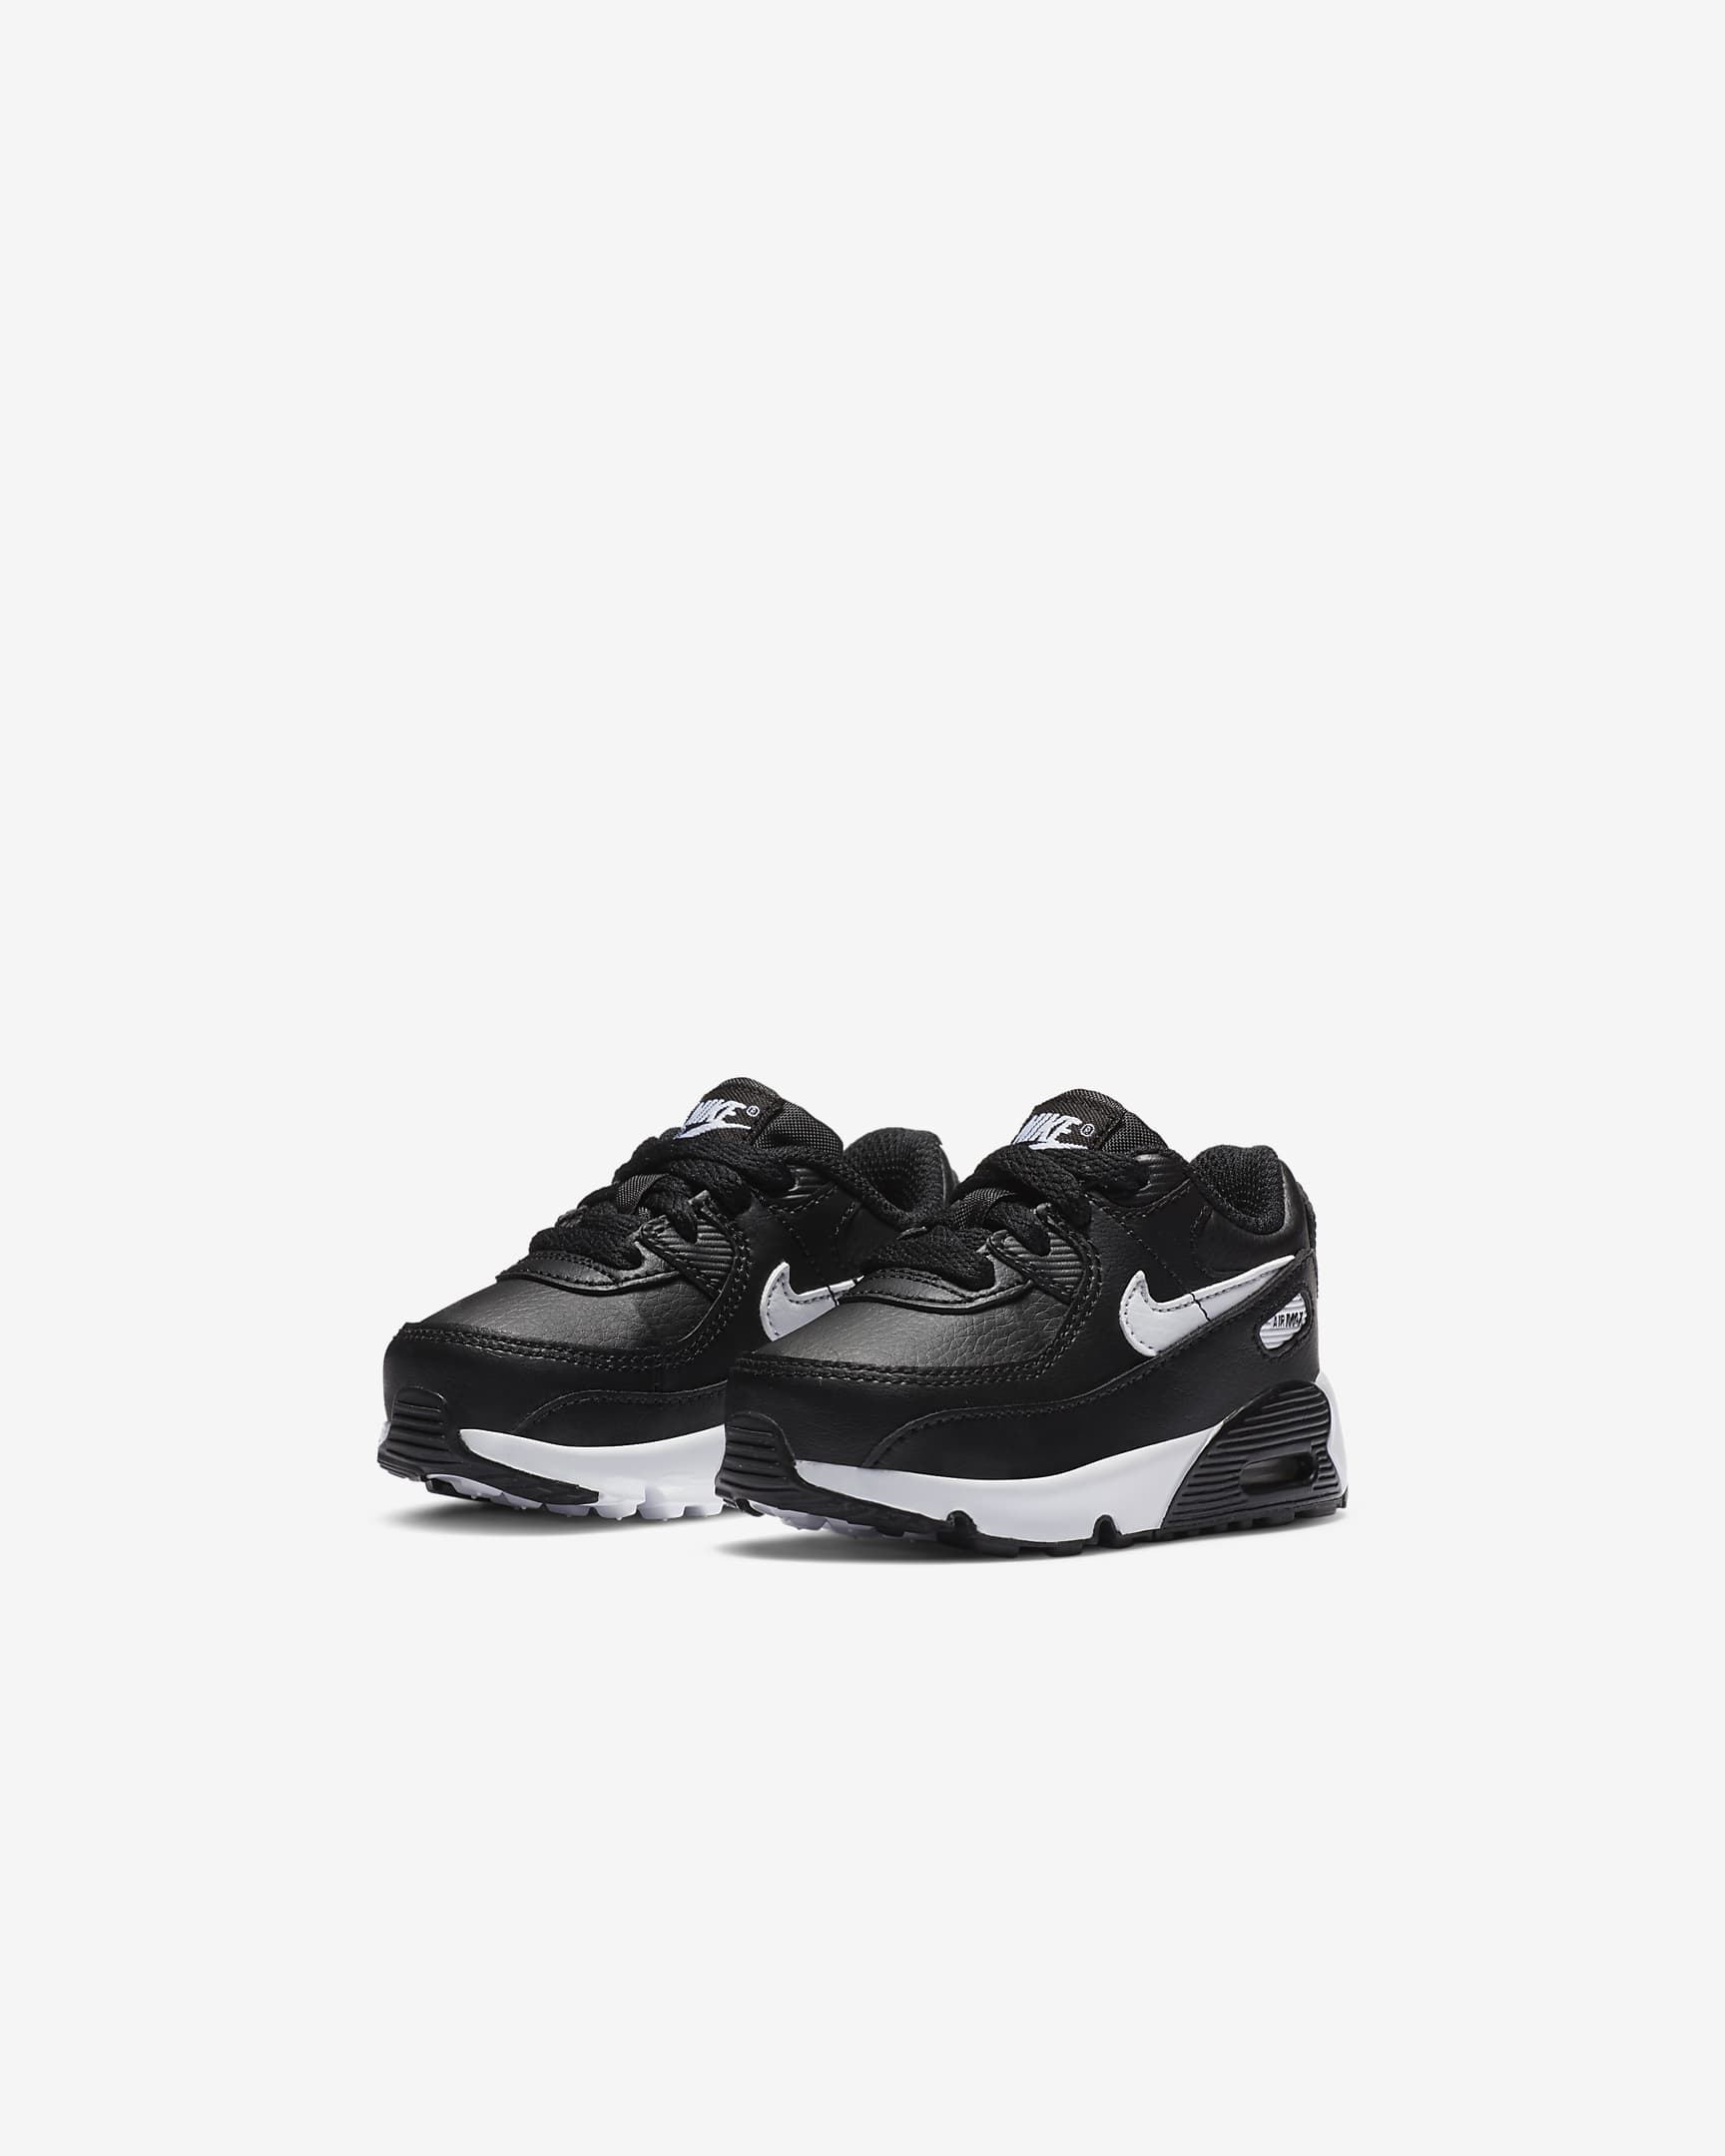 Nike Air Max 90 LTR Baby/Toddler Shoes. Nike.com